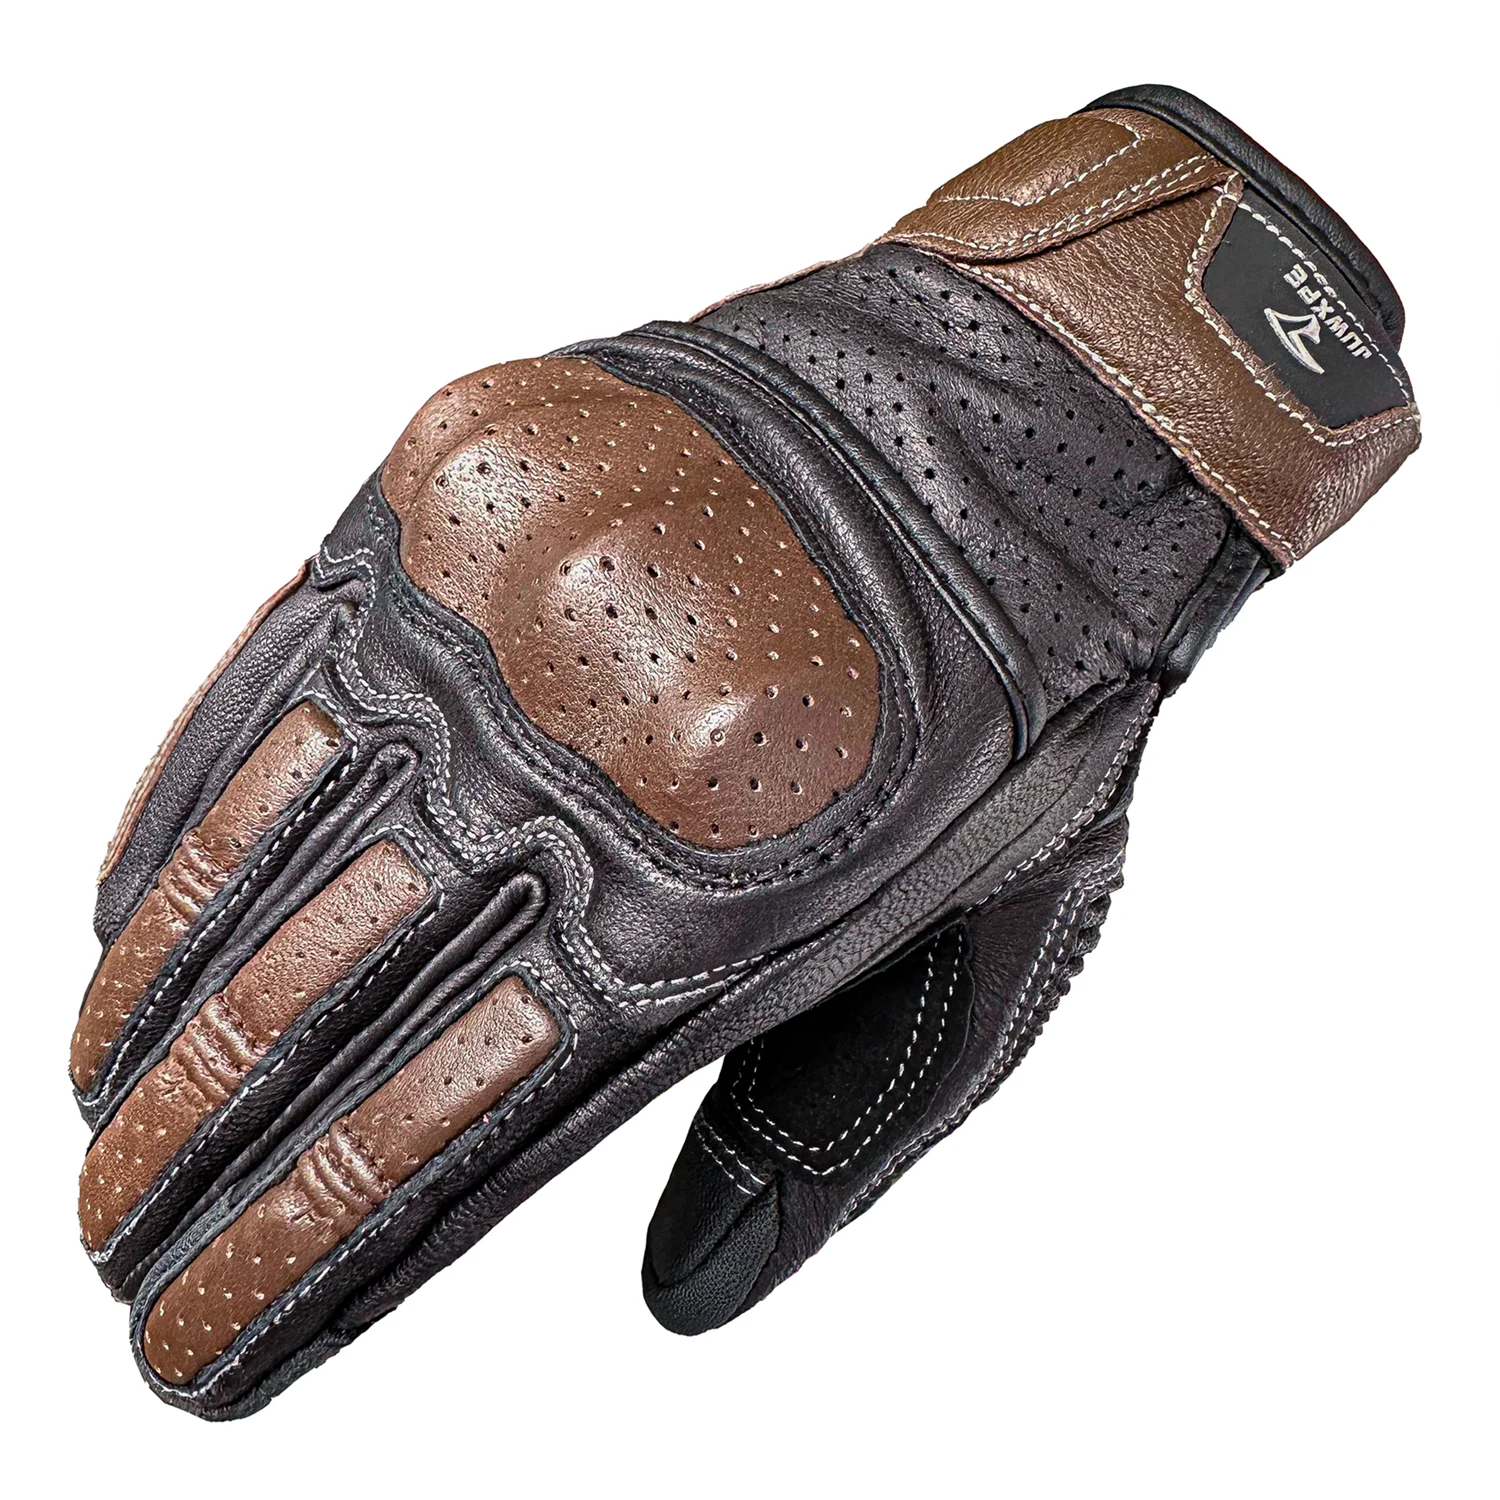 Motorbike Gloves Motocross Cycling Riding Off-road Goat Leather Motorcycle Glove Men Touch Screen Motor Vintage Motocross